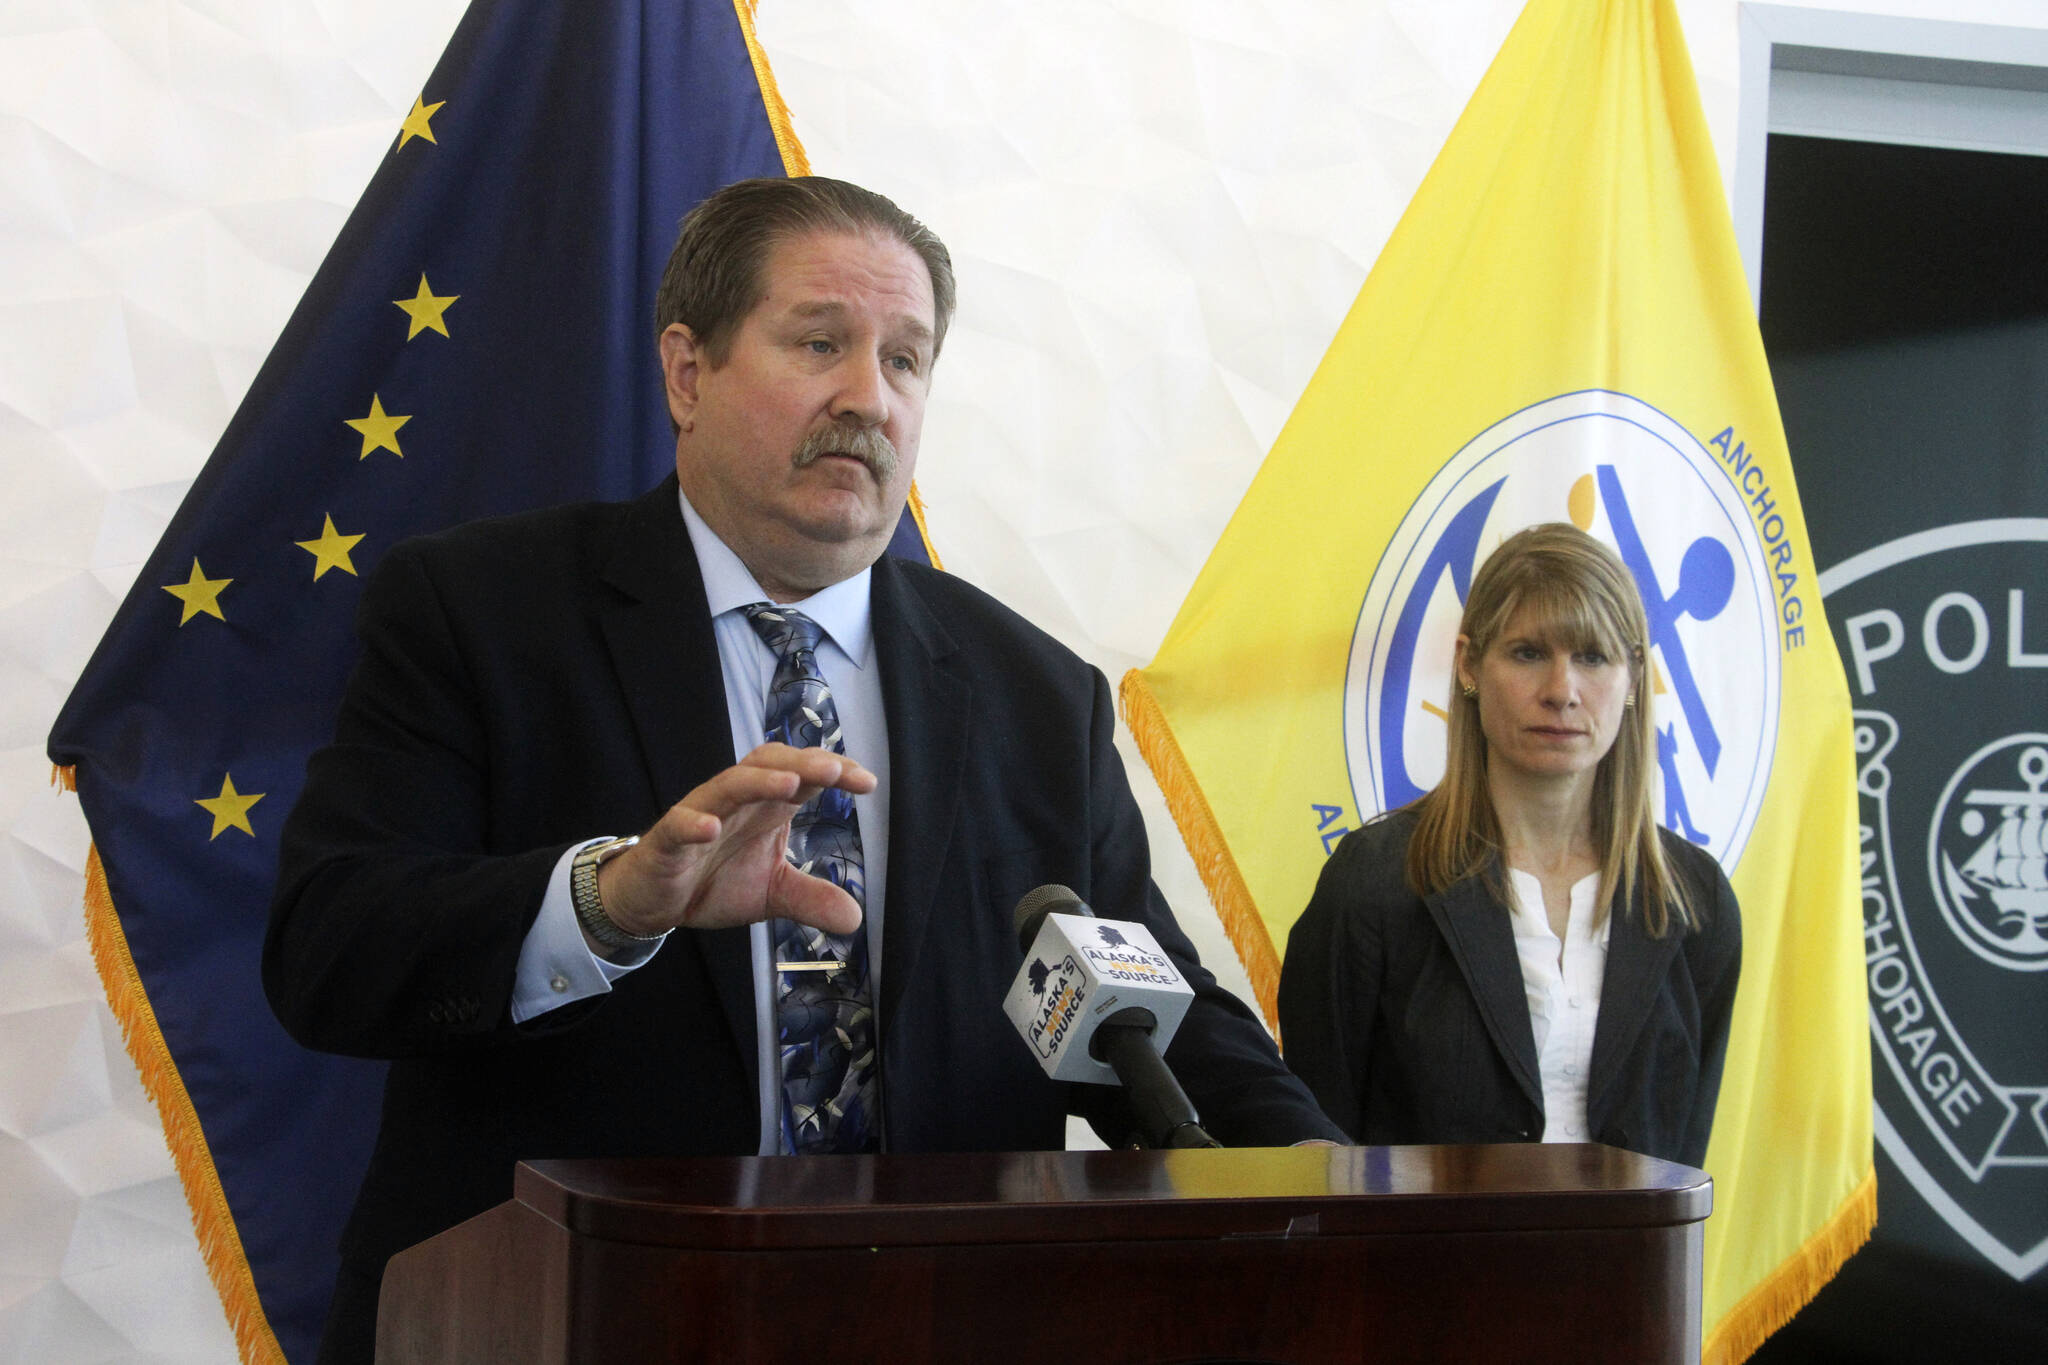 Anchorage Police Det. Dave Cordie, left, addresses reporters Thursday, May 5, 2022, in Anchorage, Alaska, about the disappearance nine years ago of a 6-year-old boy and hopes that the public will provide new leads on the whereabouts of Deshawn McCormick. On the right is attorney Rachel Gernat with the Office of Special Prosecutions, which provides legal assistance to the police on cold cases. (AP Photo/Mark Thiessen)